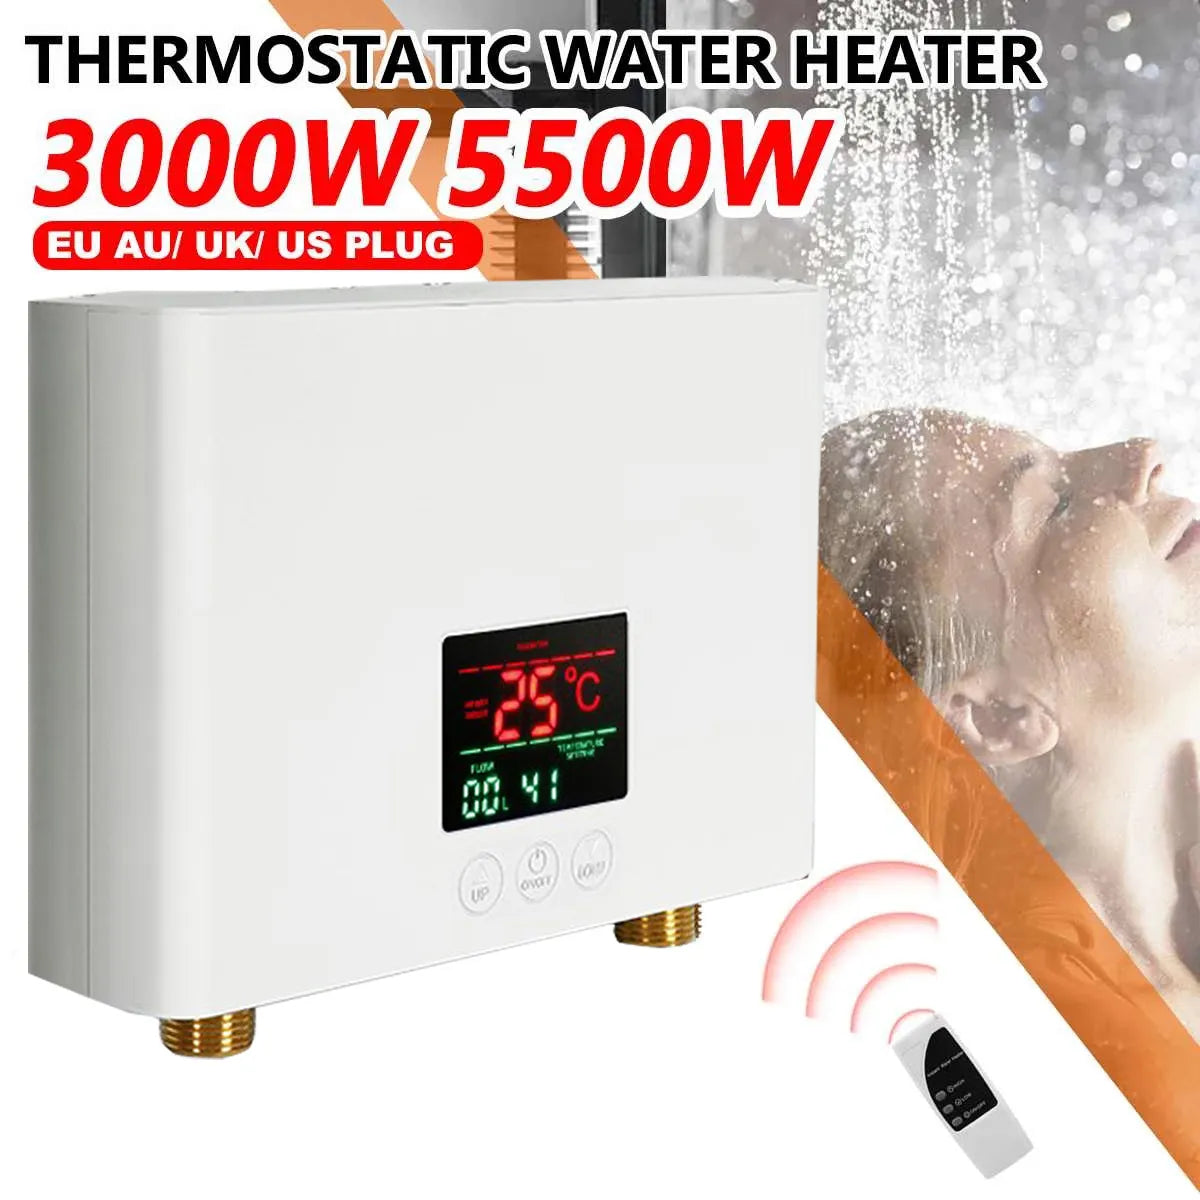 110V 220V Instant Water Heater Bathroom Kitchen Wall Mounted Electric Water Heater LCD Temperature Display with Remote Control